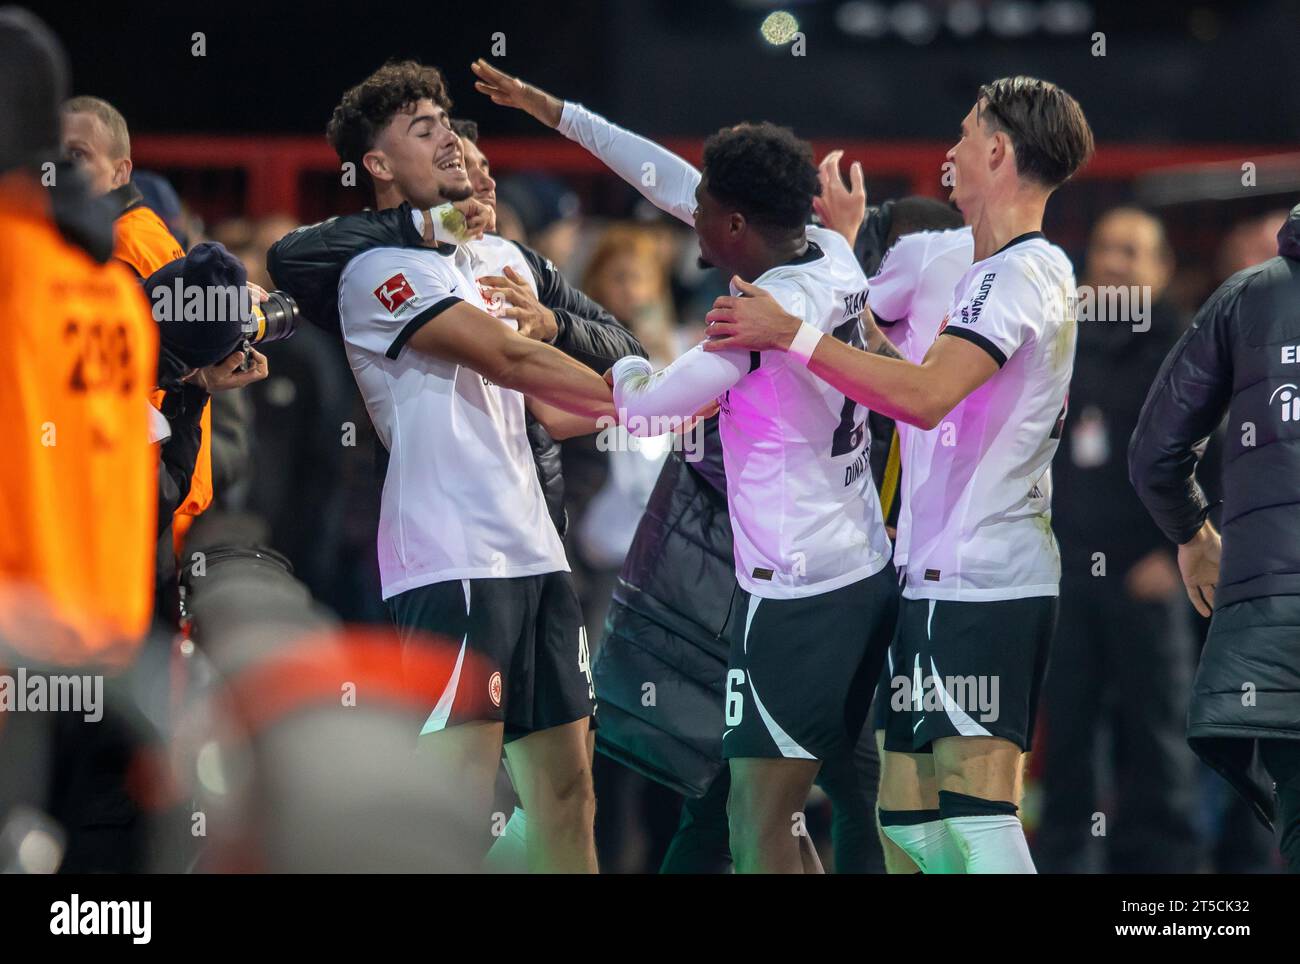 Berlin, Germany. 04th Nov, 2023. Soccer: Bundesliga, 1. FC Union Berlin - Eintracht Frankfurt, Matchday 10, An der Alten Försterei. The team celebrates the 3:0 goal by Nacho Ferri from Eintracht Frankfurt. Credit: Andreas Gora/dpa - IMPORTANT NOTE: In accordance with the regulations of the DFL German Football League and the DFB German Football Association, it is prohibited to utilize or have utilized photographs taken in the stadium and/or of the match in the form of sequential images and/or video-like photo series./dpa/Alamy Live News Stock Photo